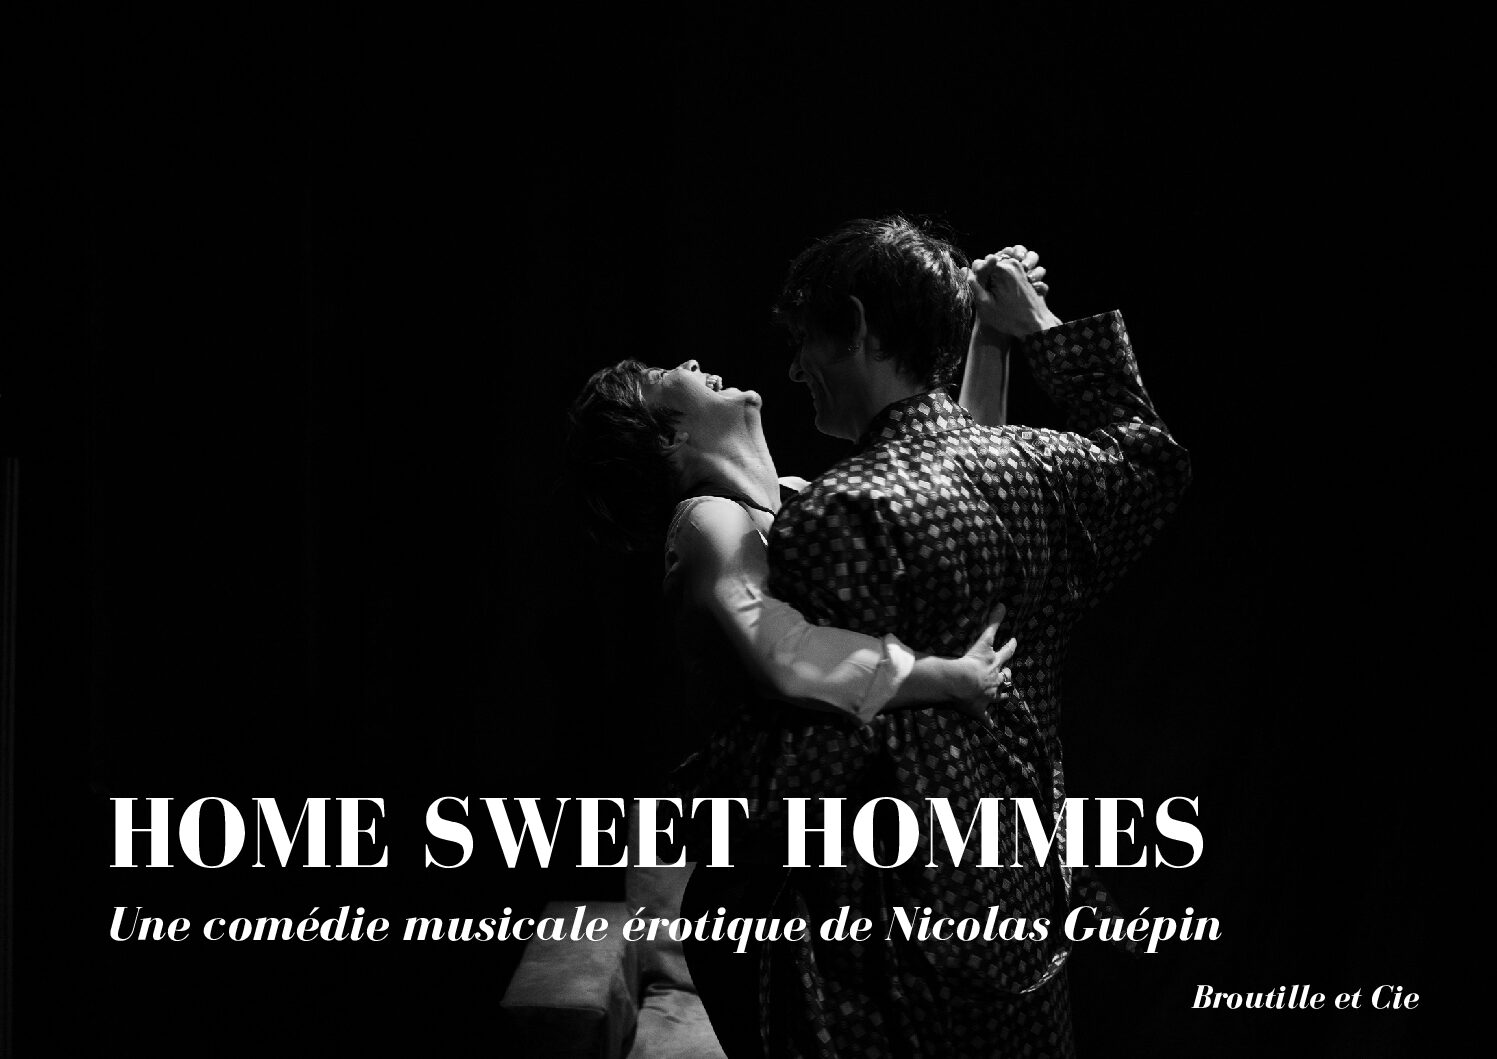 HOME SWEET HOMMES